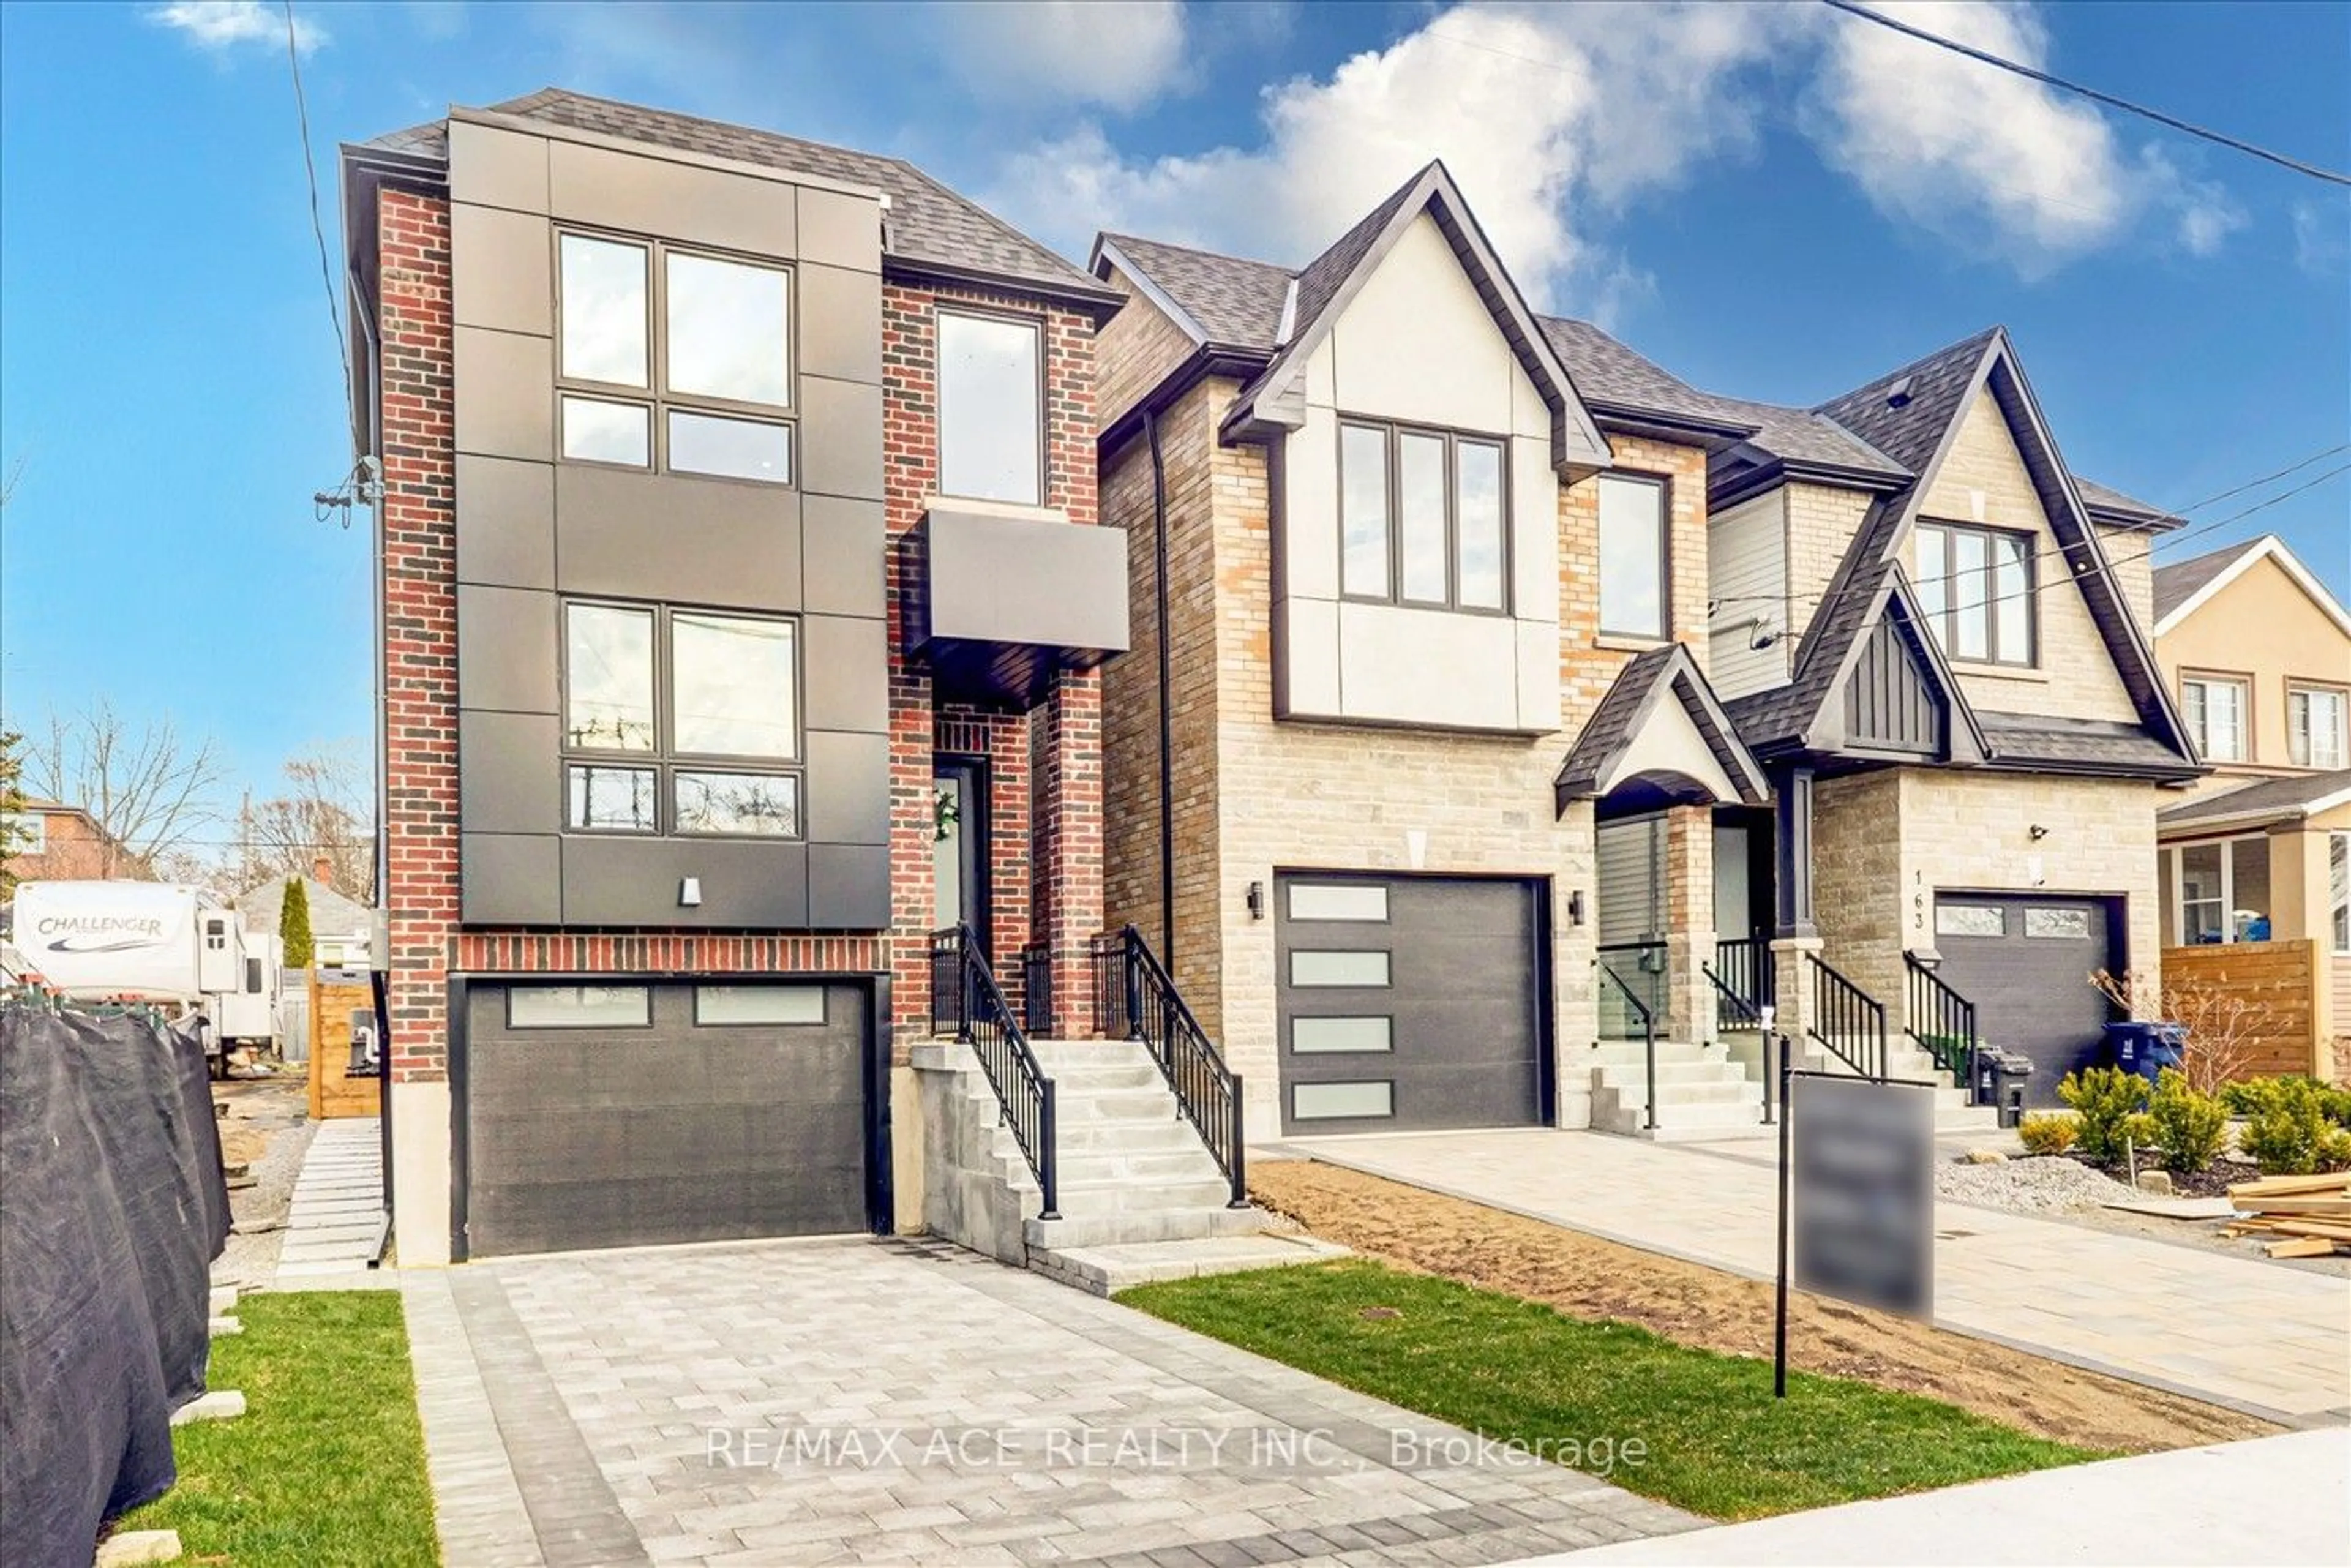 Home with brick exterior material for 167 August Ave, Toronto Ontario M1L 3N3